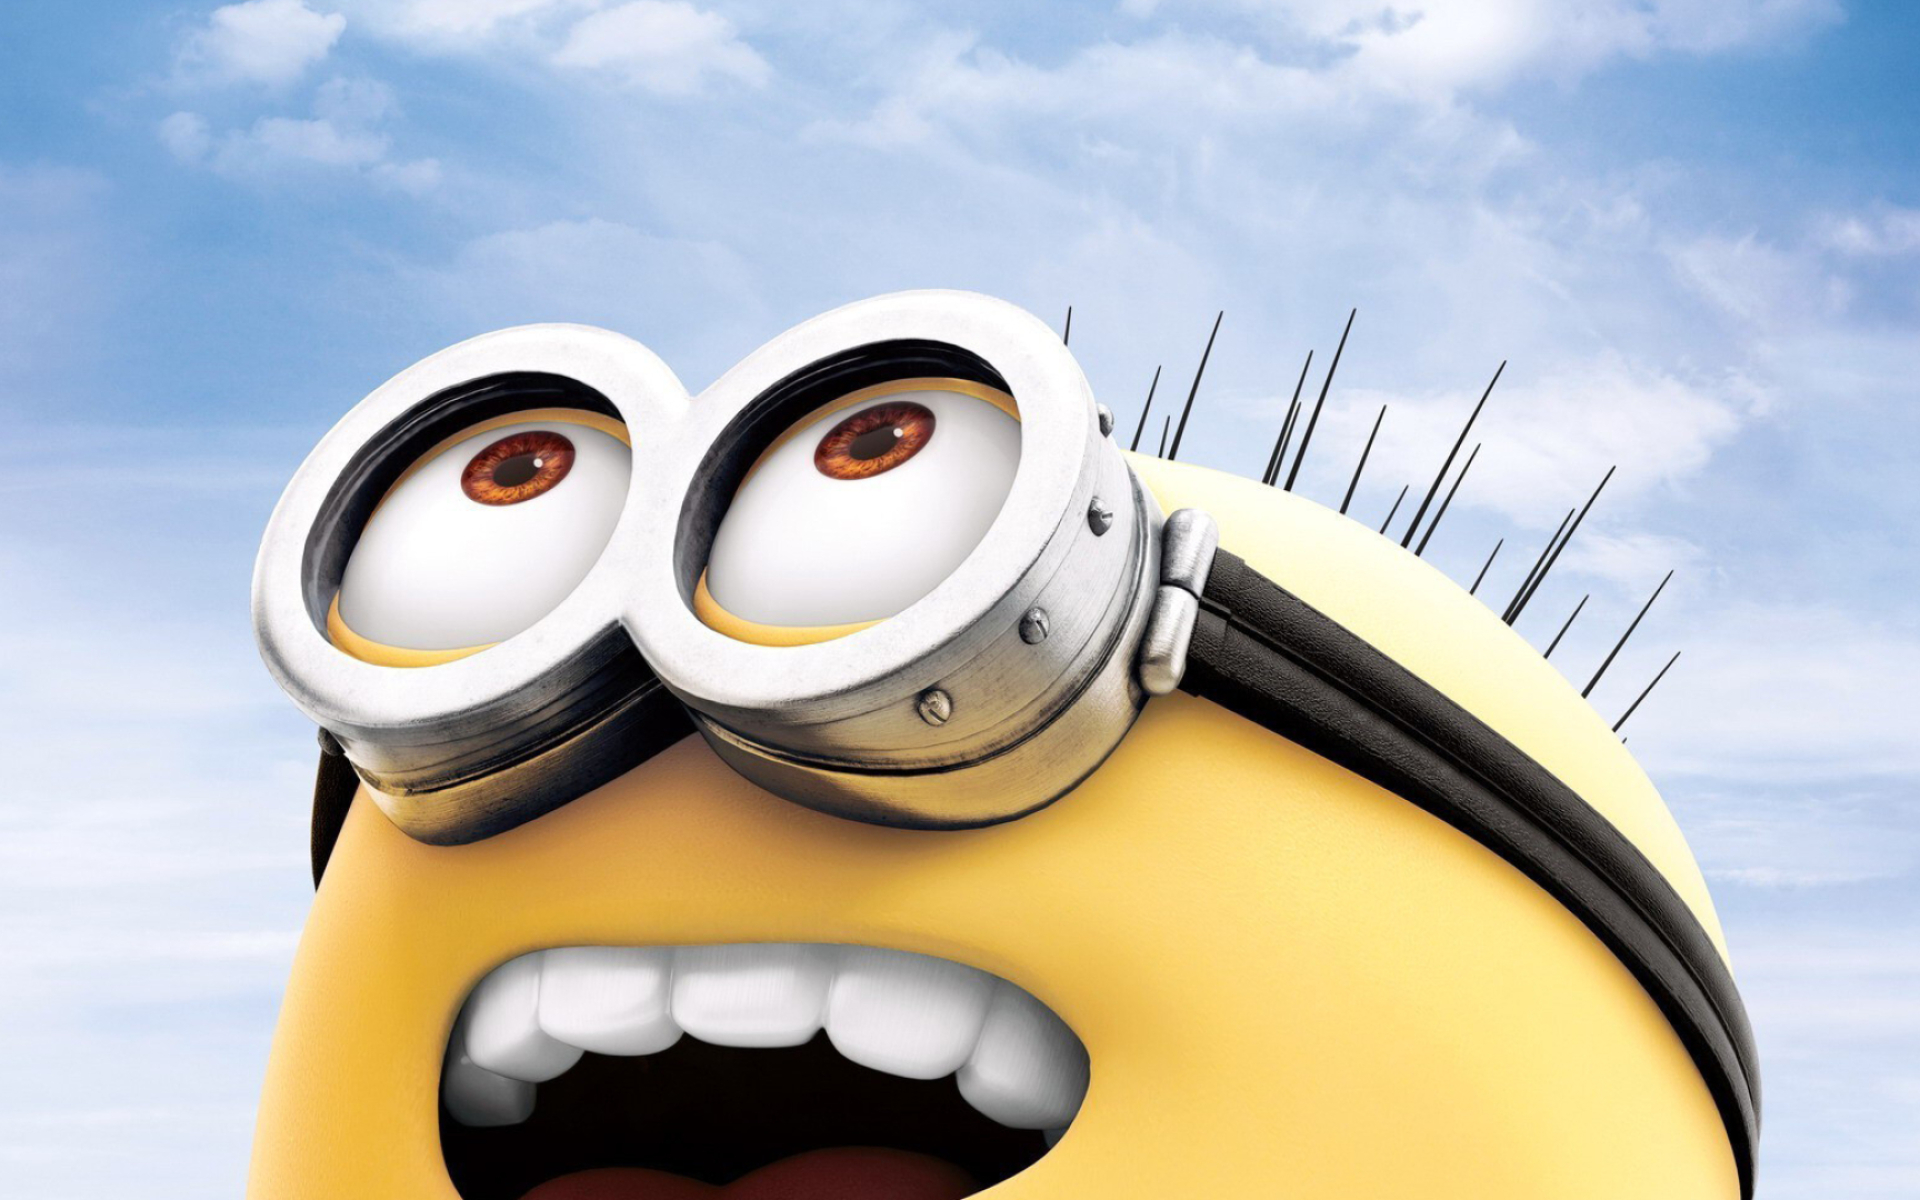 Despicable Me: Minion, The film follows Gru as he is recruited by secret agent Lucy Wilde. 1920x1200 HD Wallpaper.